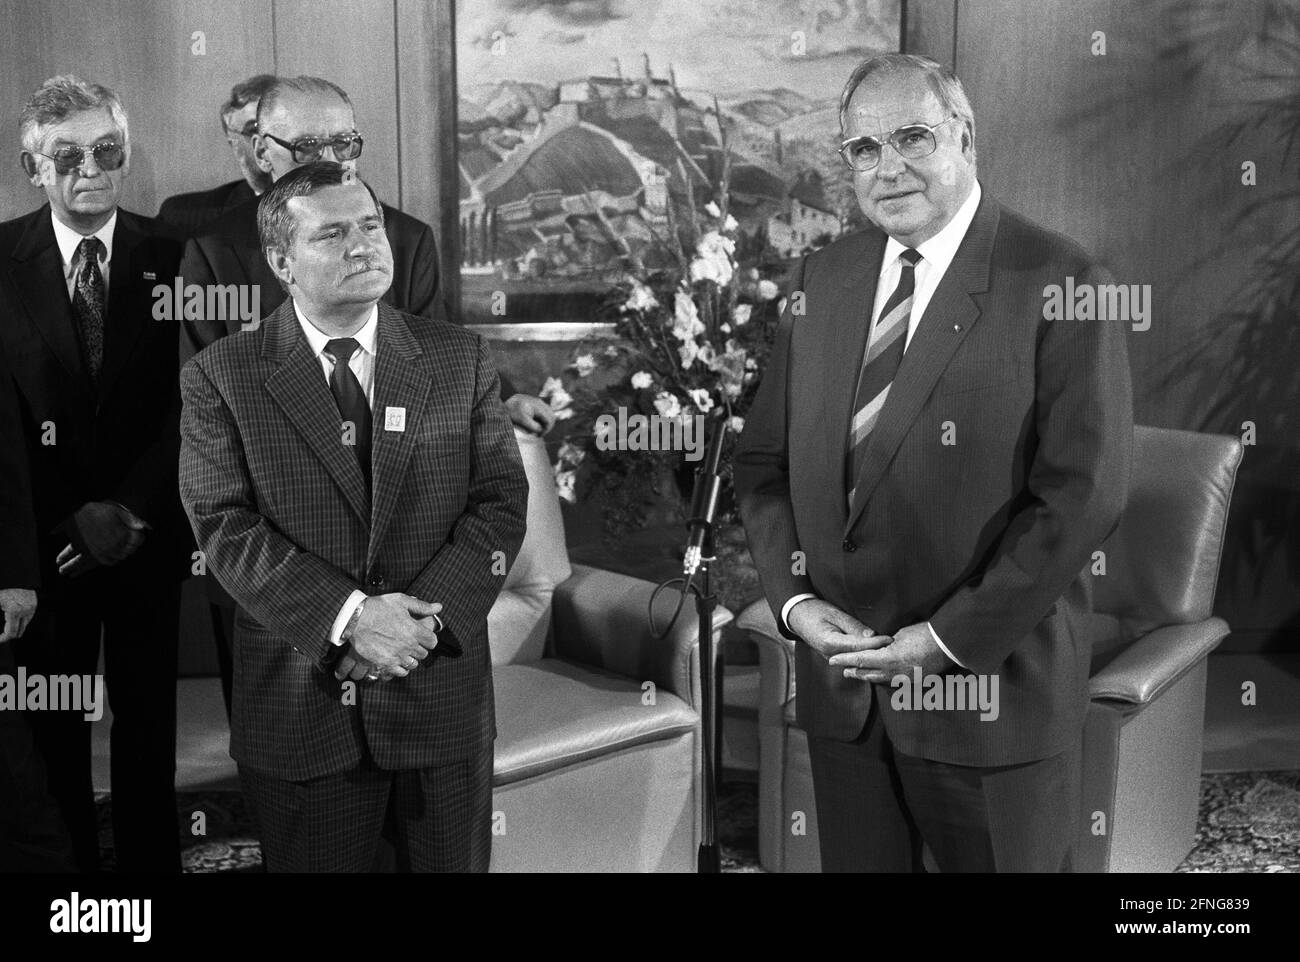 Germany, Bonn, 07.09.1989. Archive No: 08-19-34 Visit of Lech Walesa, chairman of the Solidarno?? trade union Photo: Lech Walesa and Chancellor Helmut Kohl at the Chancellery. [automated translation] Stock Photo